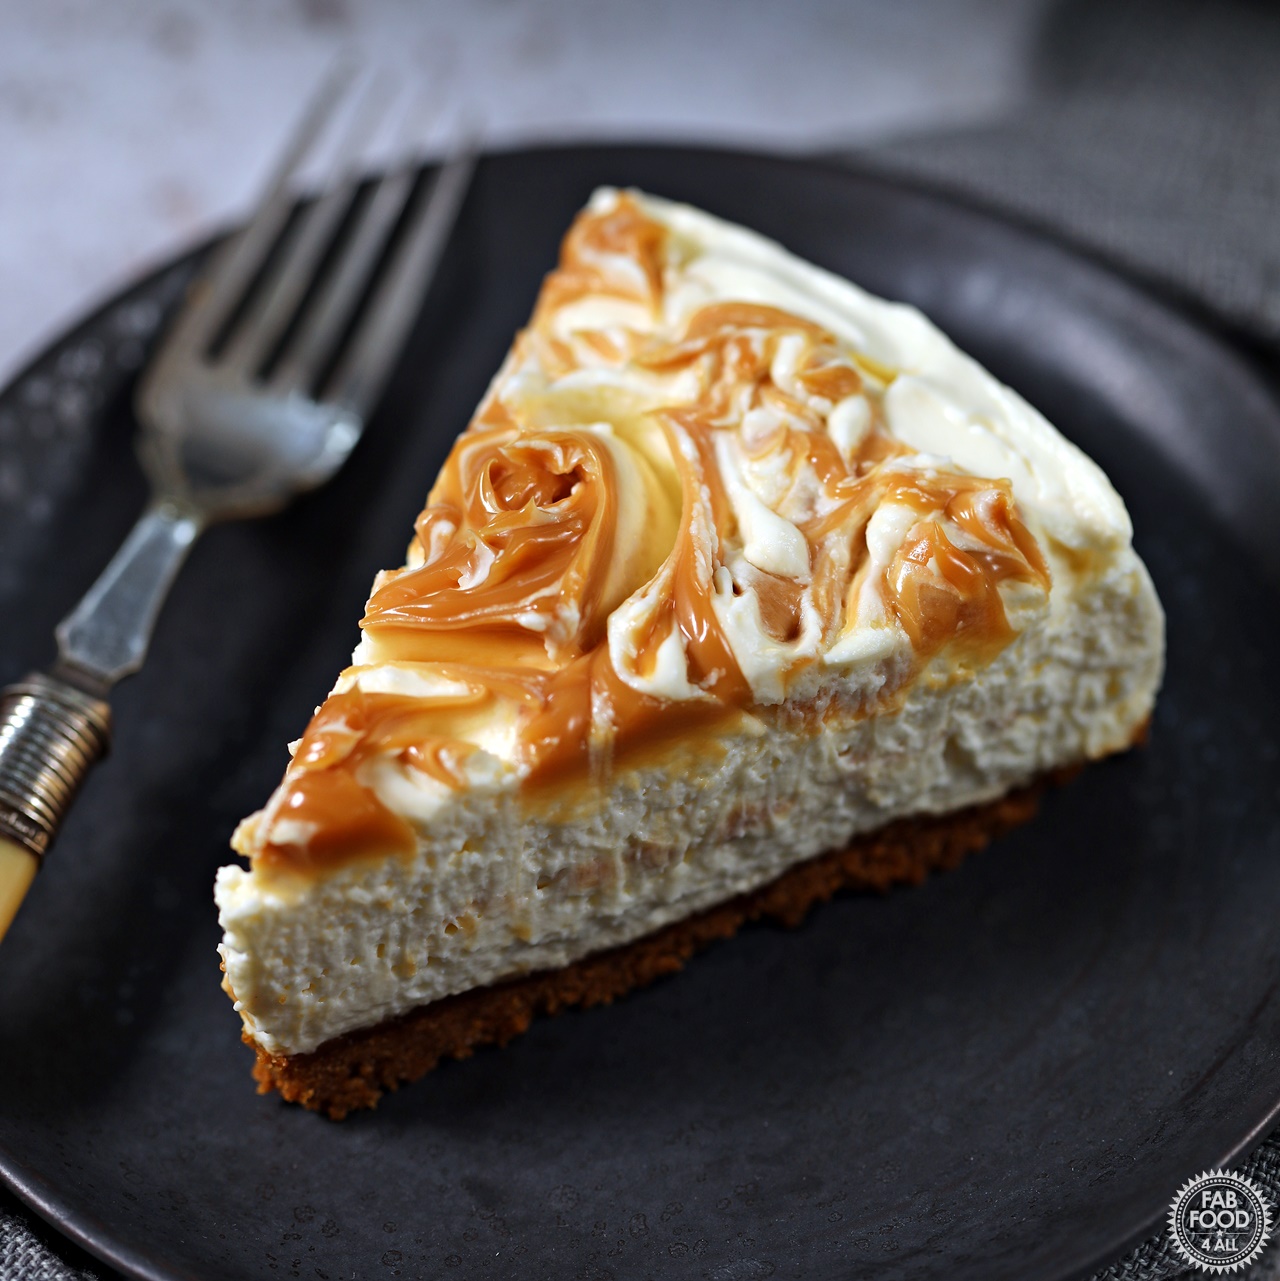 Slice of Easy No Bake Salted Caramel Cheesecake on a plate with fork.